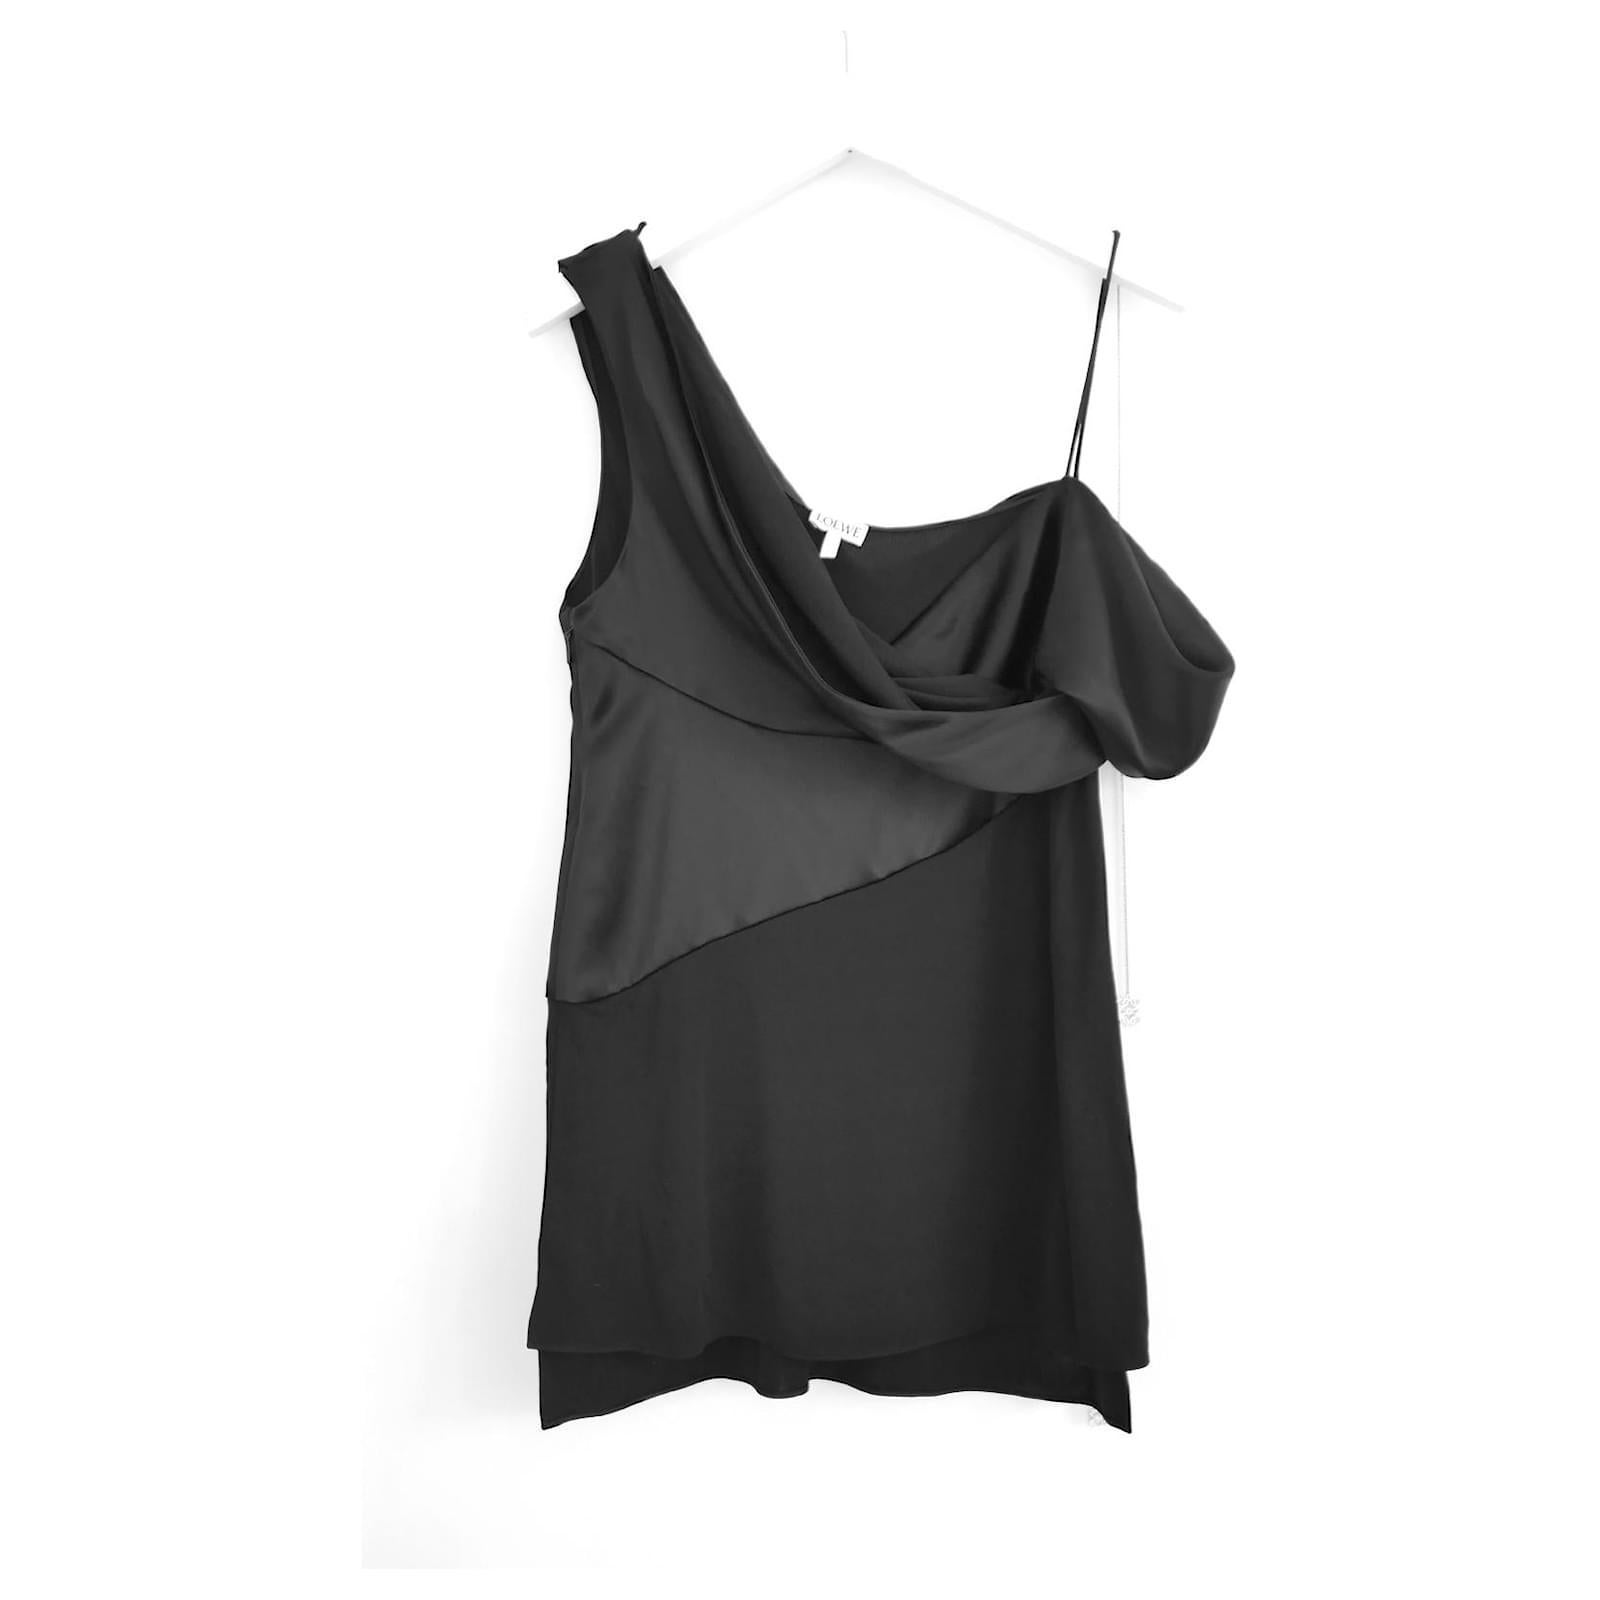 Modern drama Loewe draped satin and crepe top. bought for £1025 and new with tags. 
Made from glossy black triacetate mix satin with bias cut matte jersey crepe panel, it has an asymmetric off he should neckline with fine Anagram fob chain